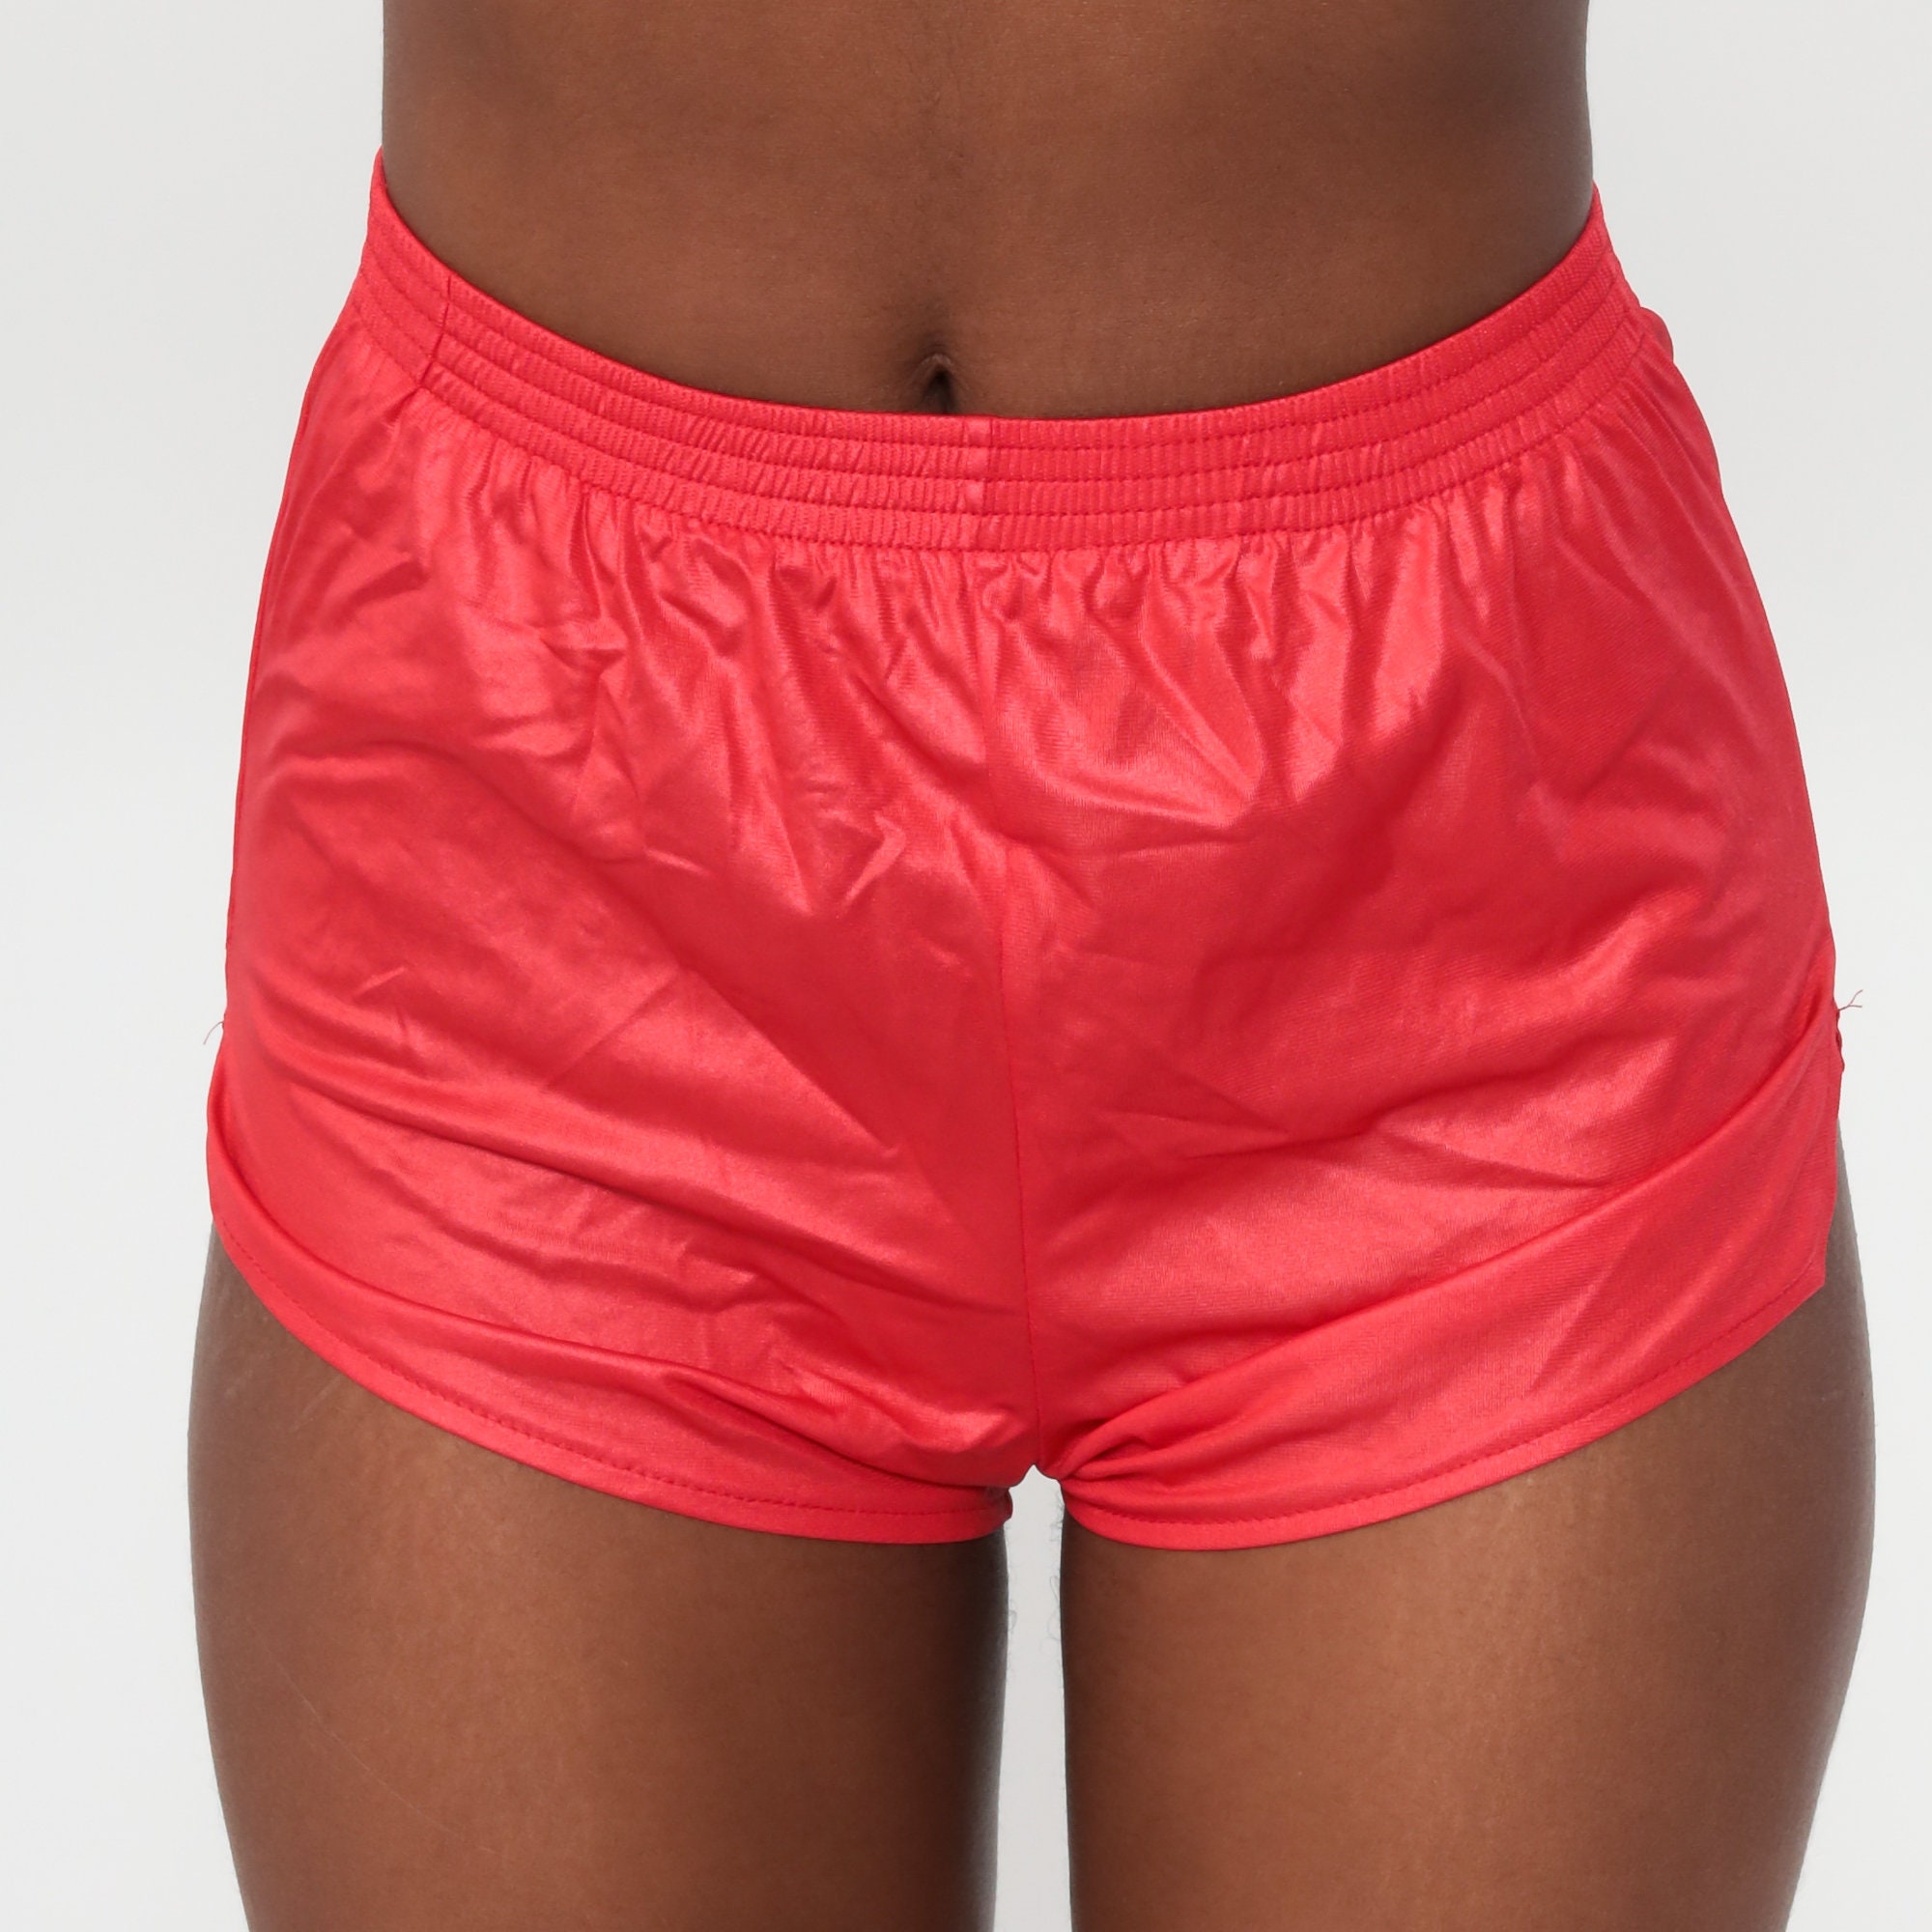  Red workout shorts for Burn Fat fast